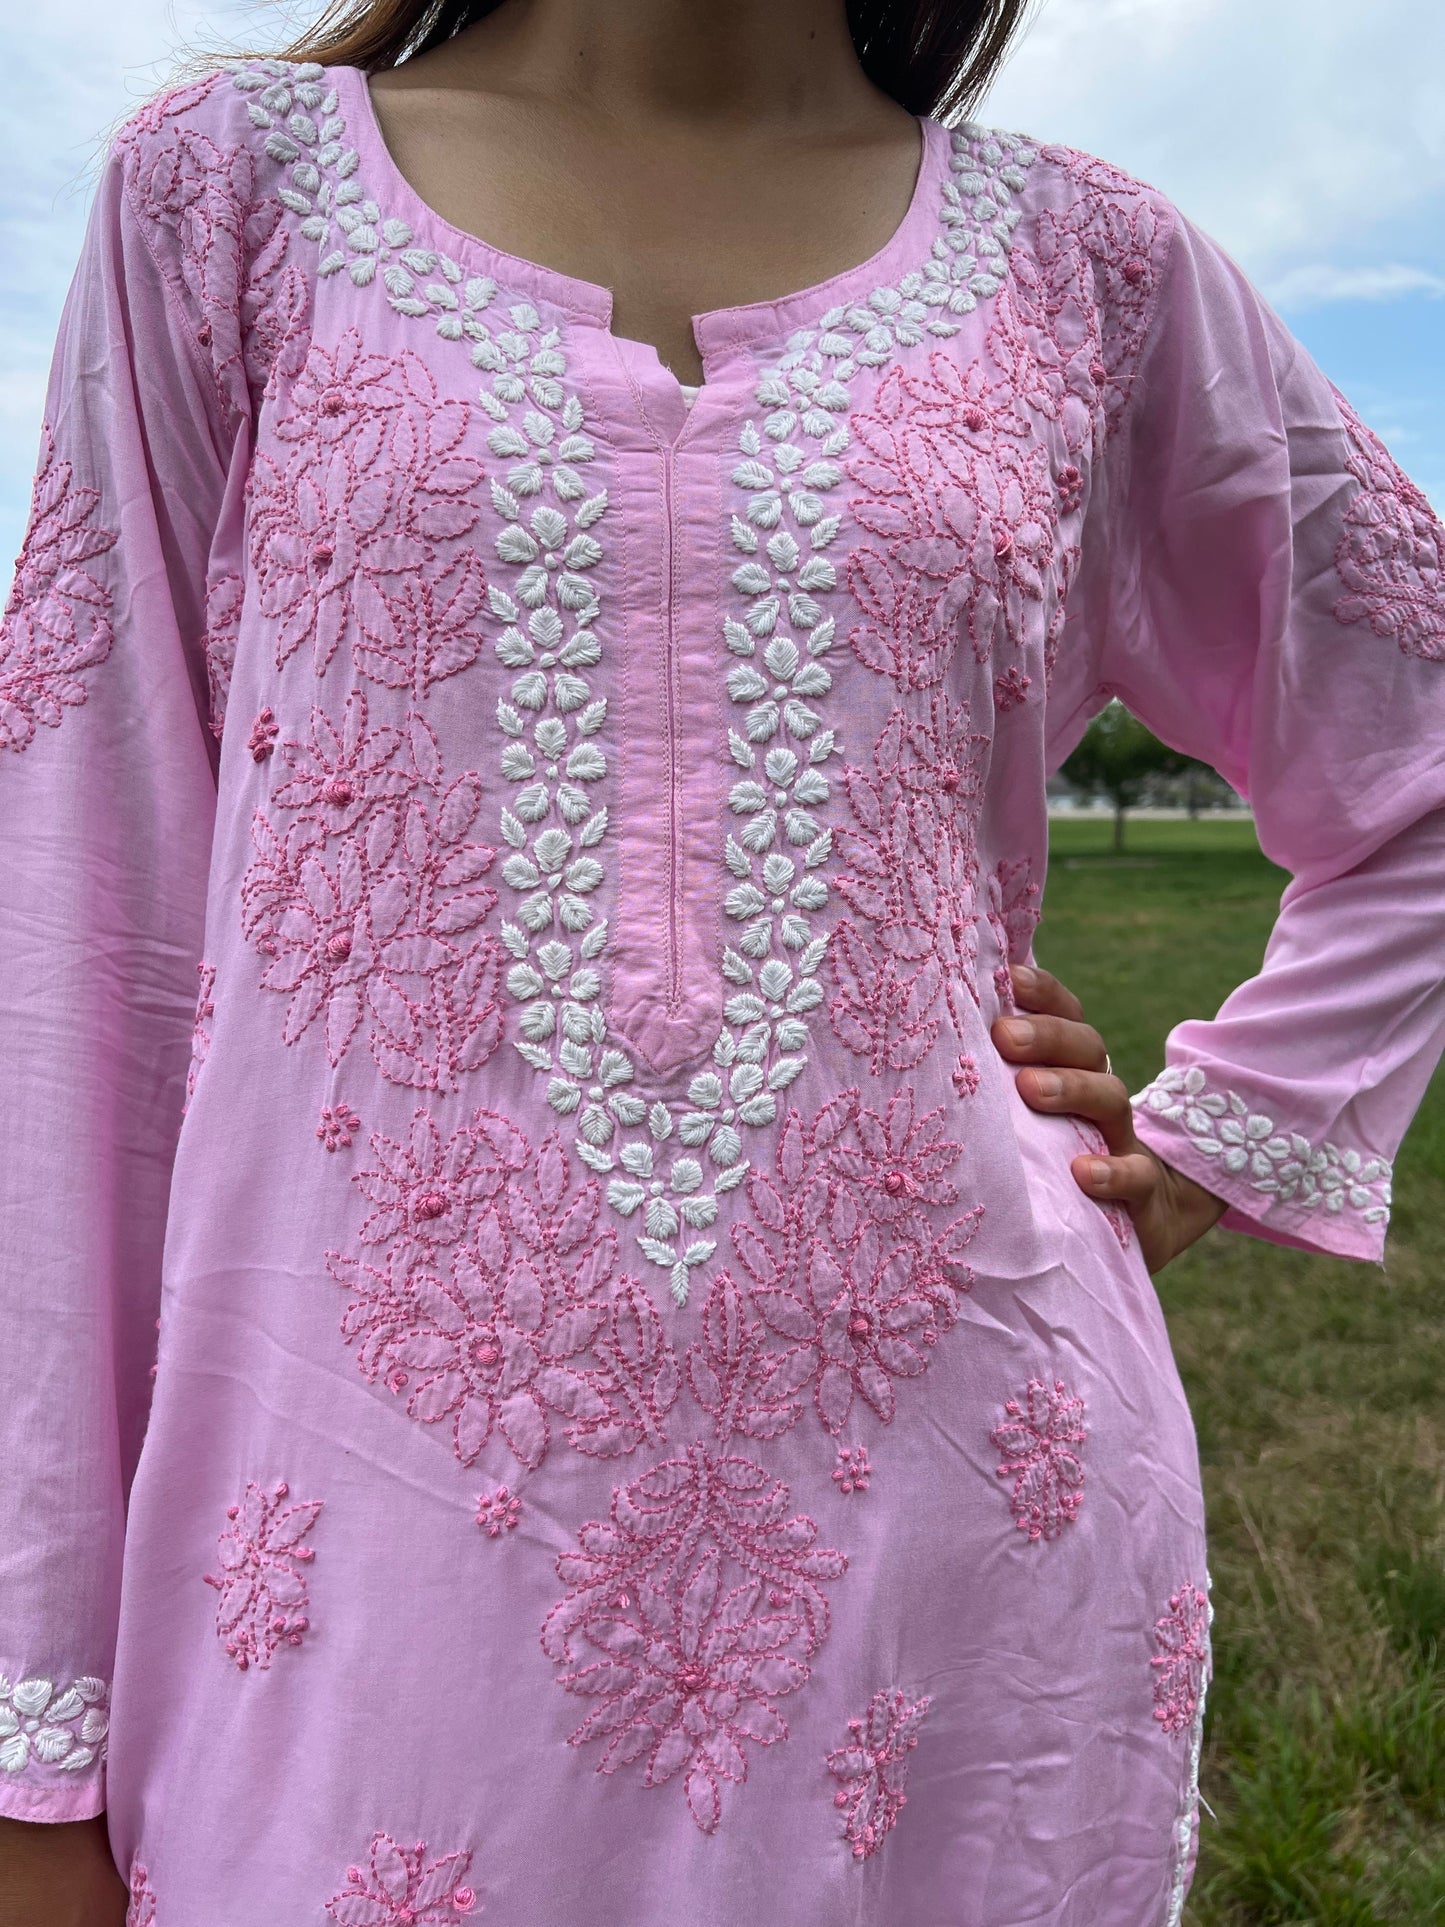 Chikankari floral border in white threads in neckline and floral bail and booti in dark pink threads